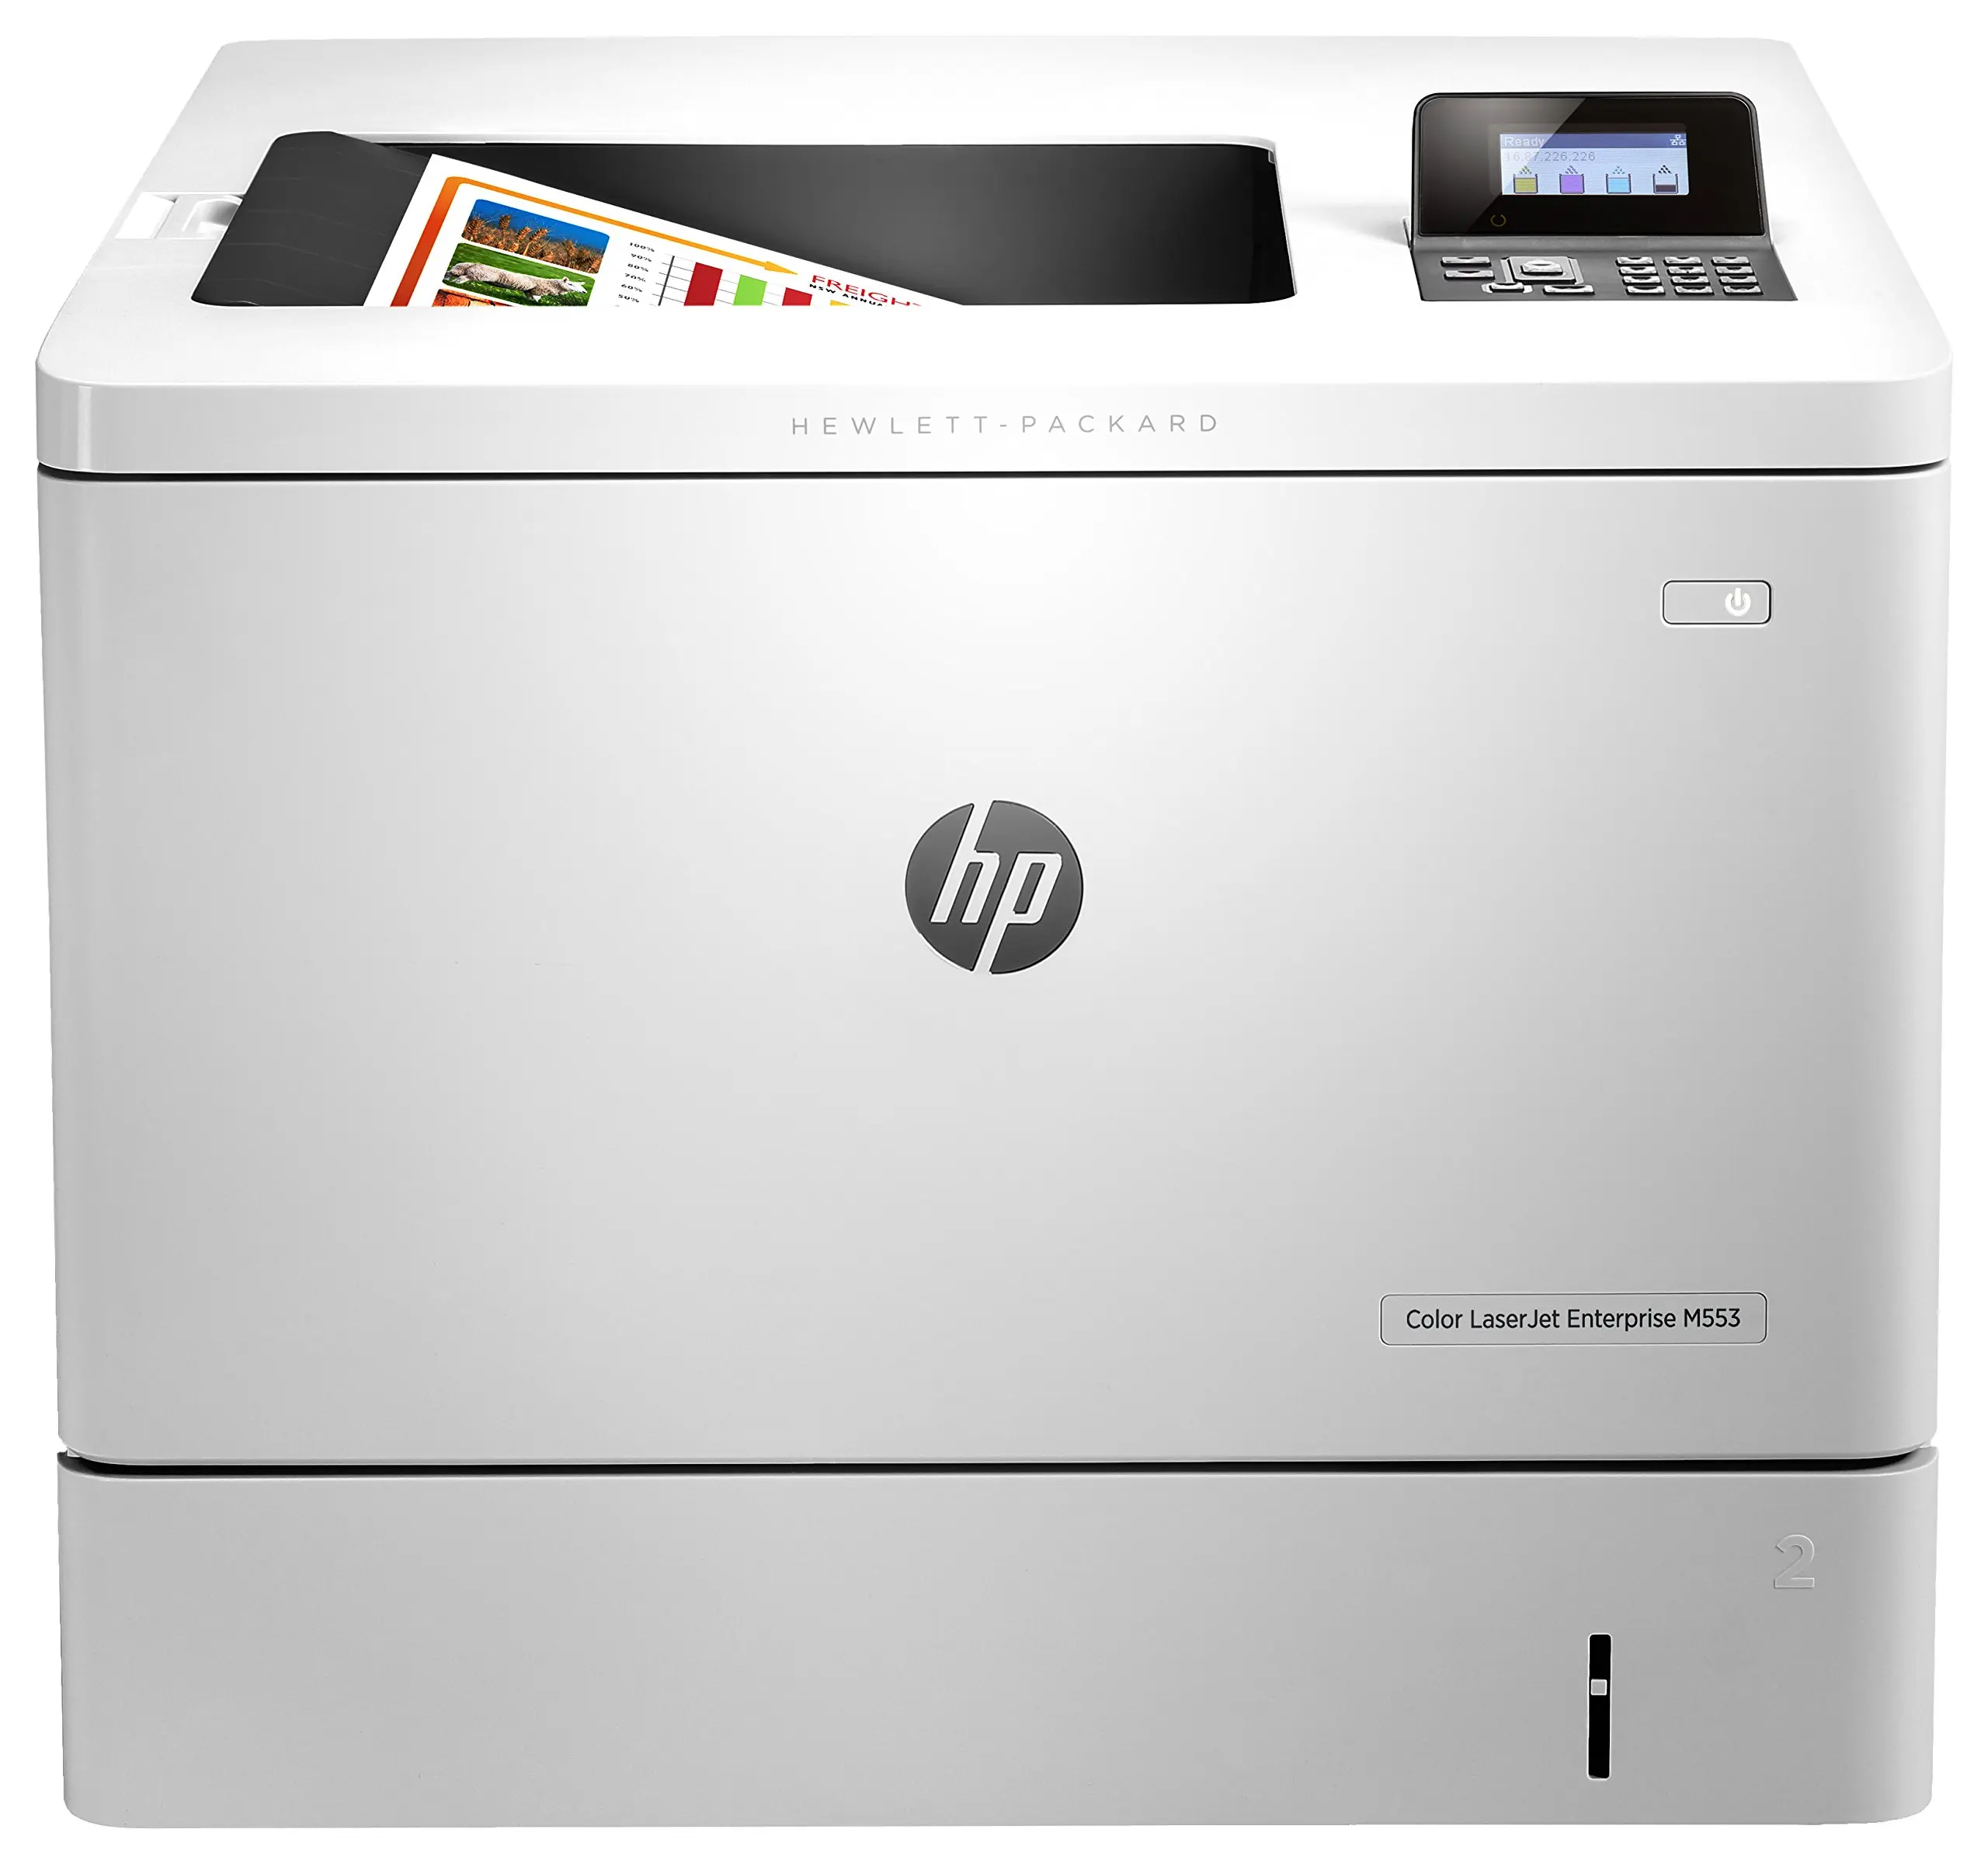 hewlett packard desktop color mfp - How do I fix the color problems on my HP printer